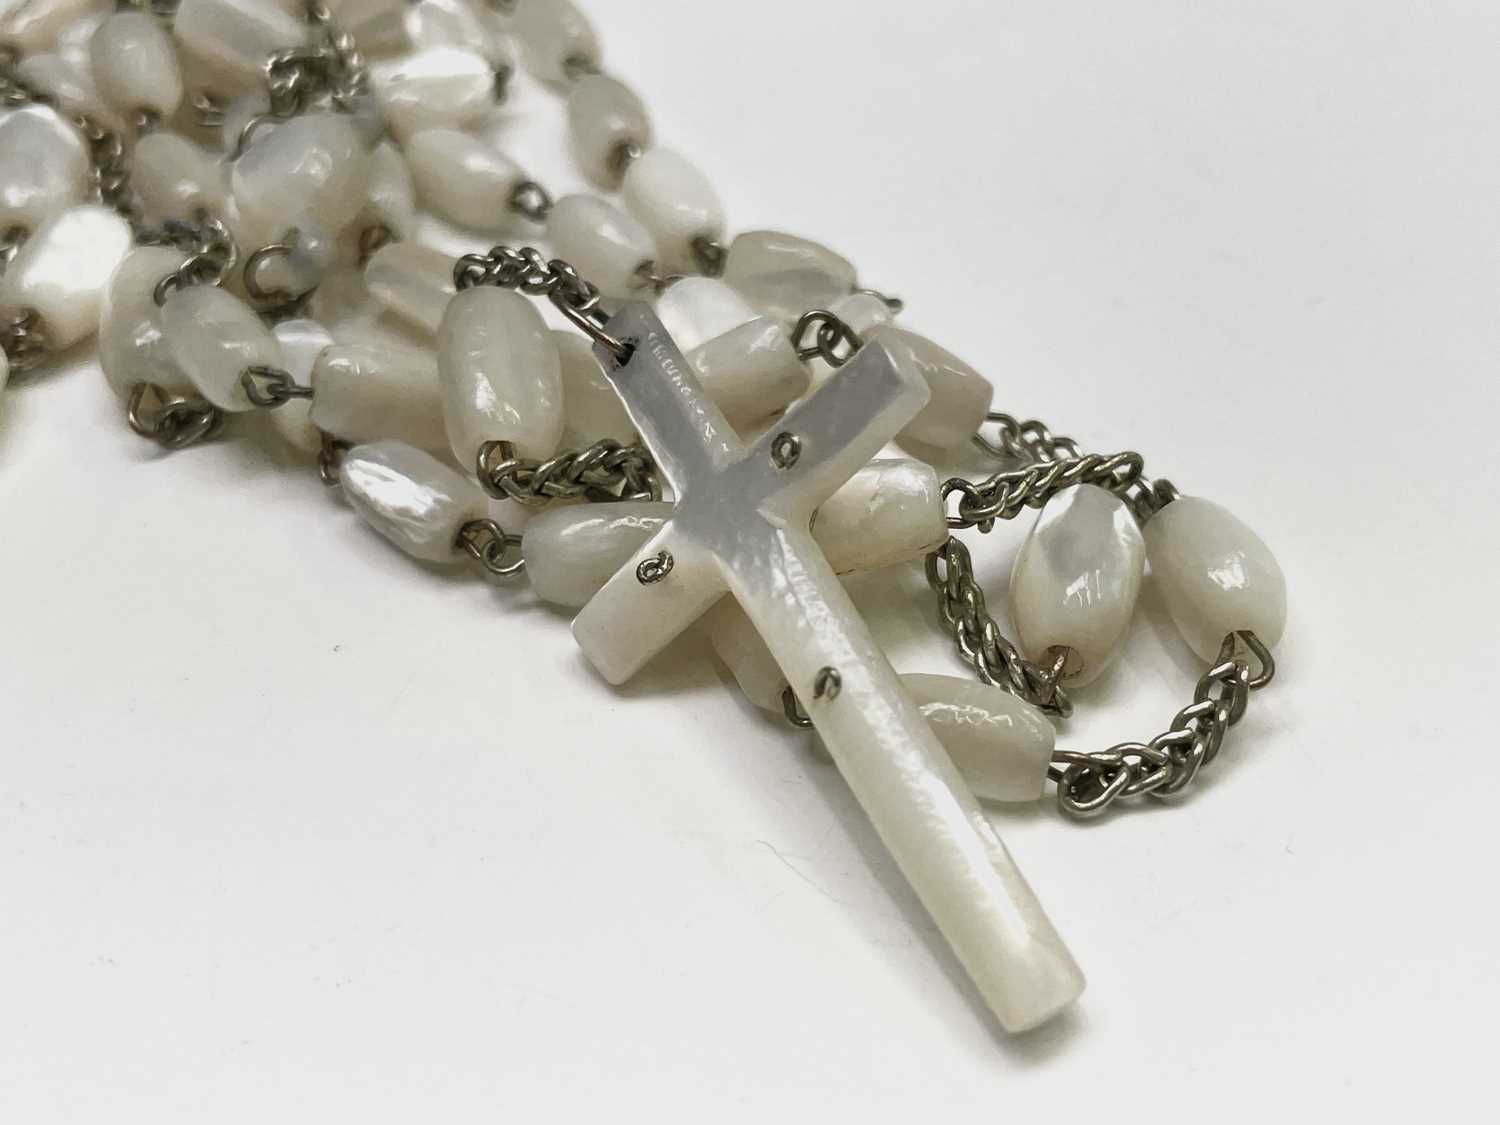 Fifteen rosary bead necklaces, all with unique decorative crosses. - Image 9 of 20